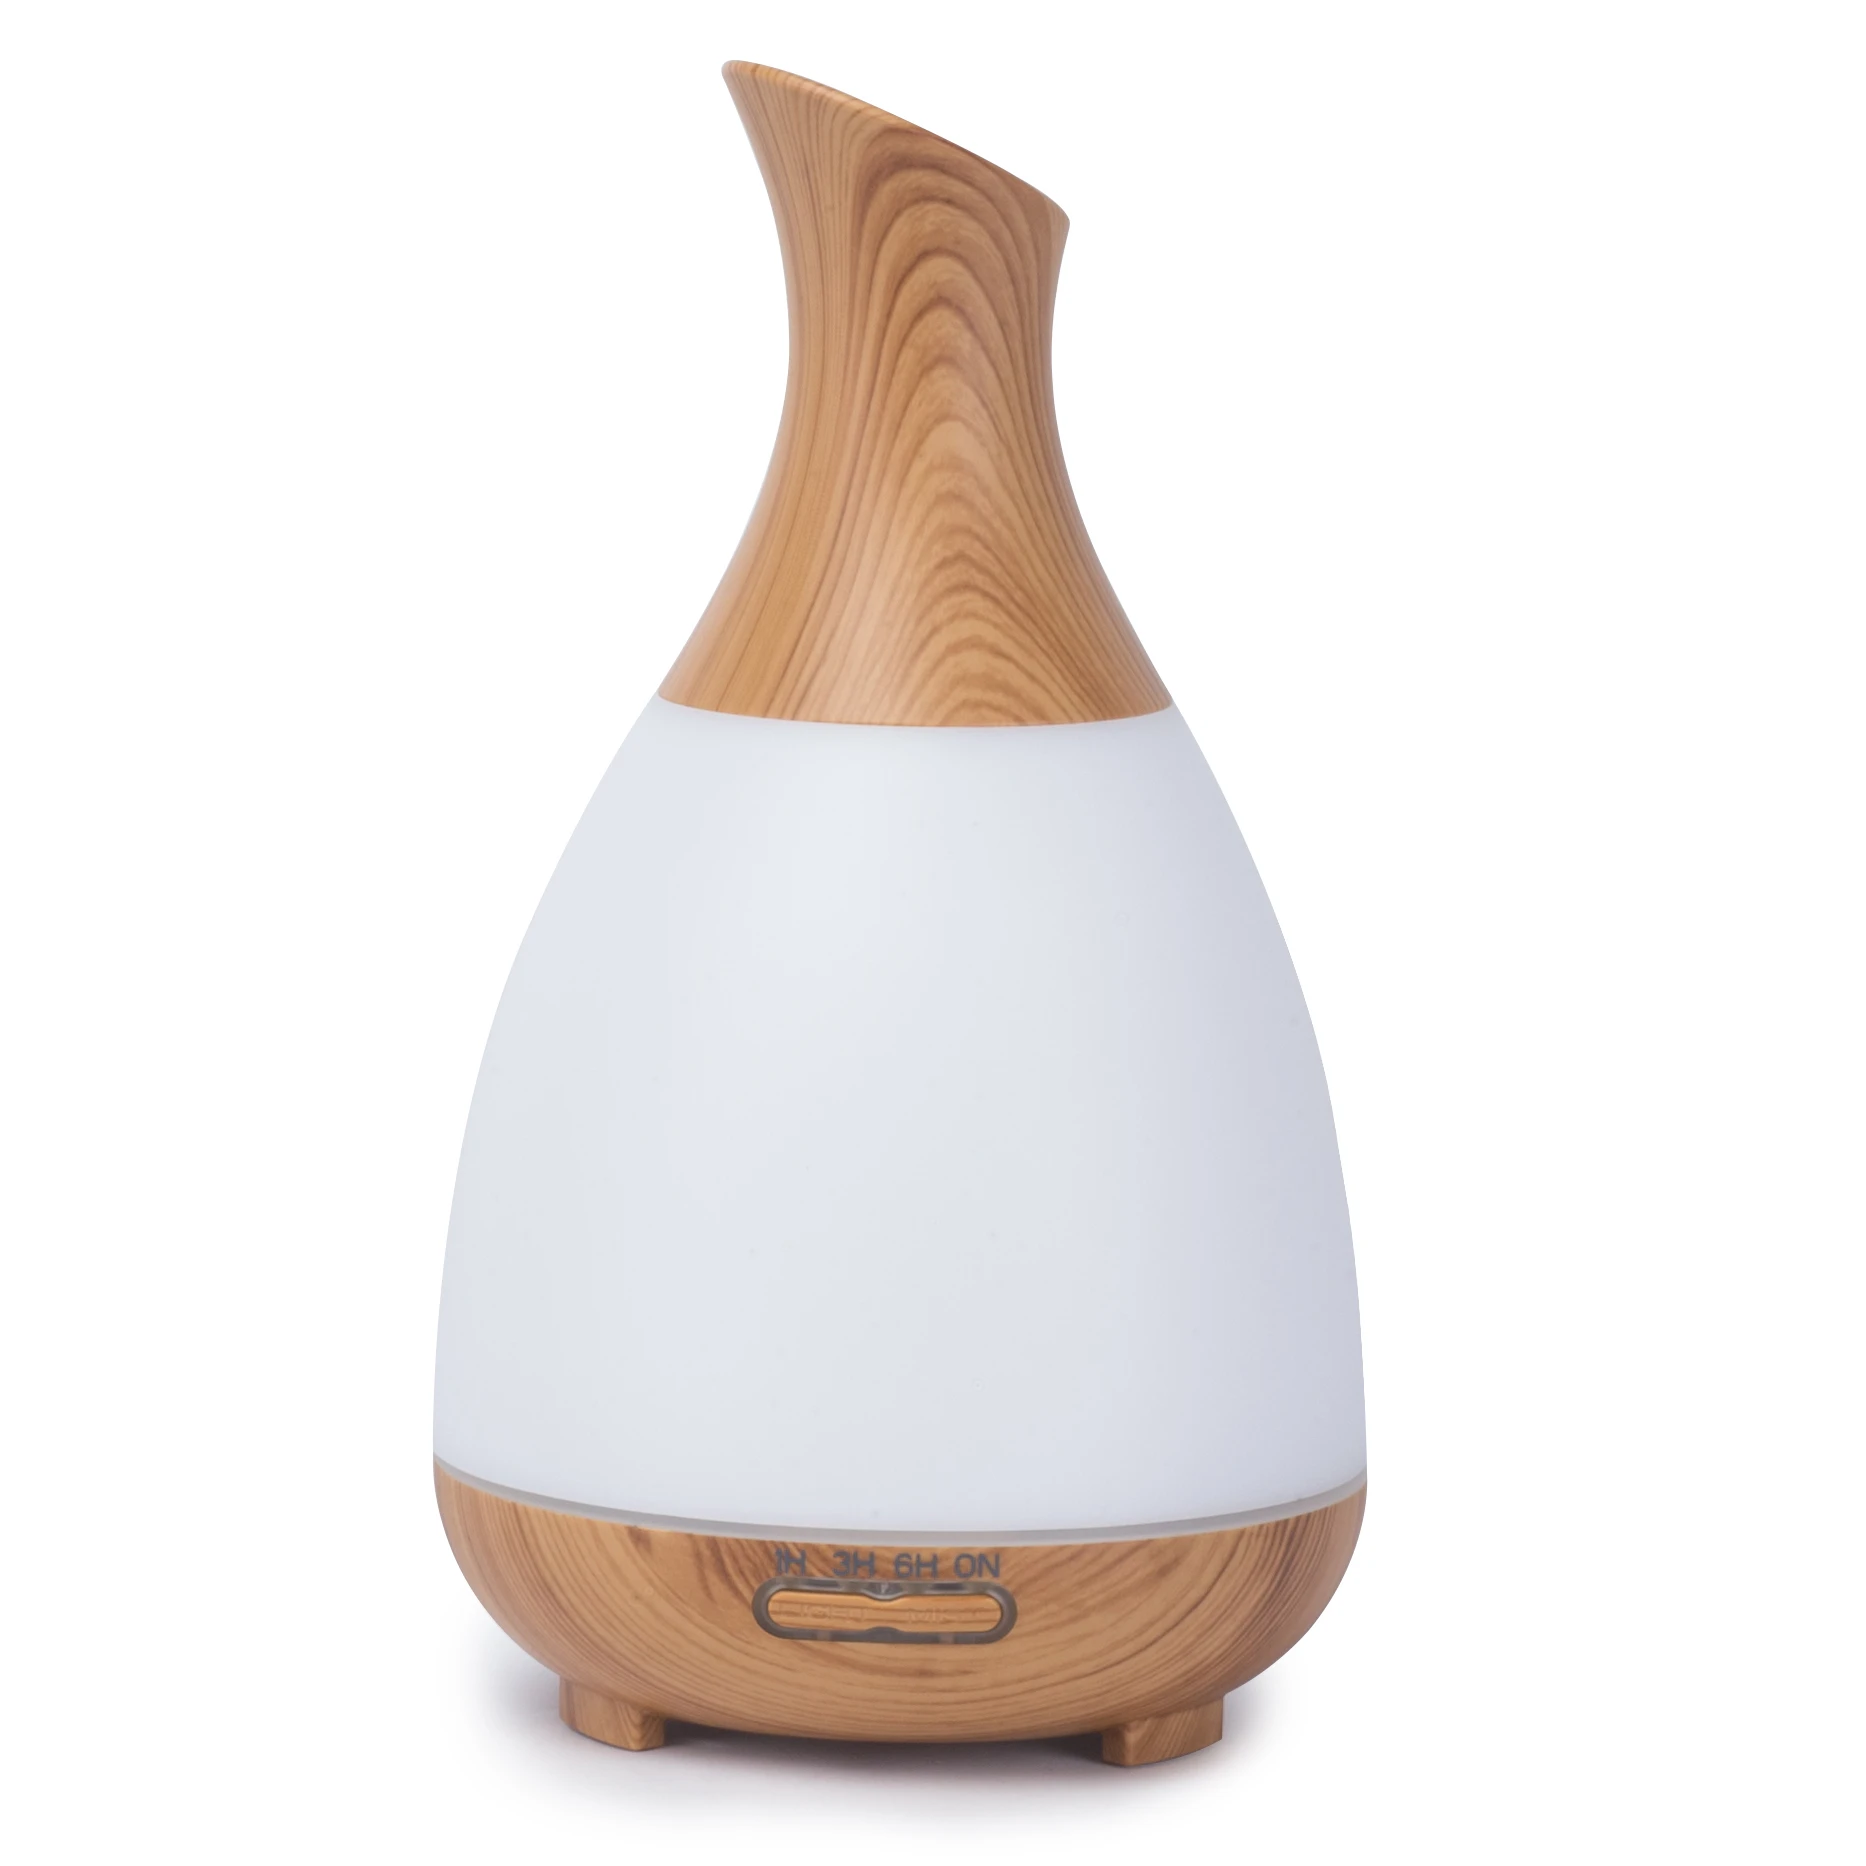 New Flower Vase Electric Air Freshener Danq Humidifier Price Luchtbevochtiger Essential Oil Aroma Diffuser